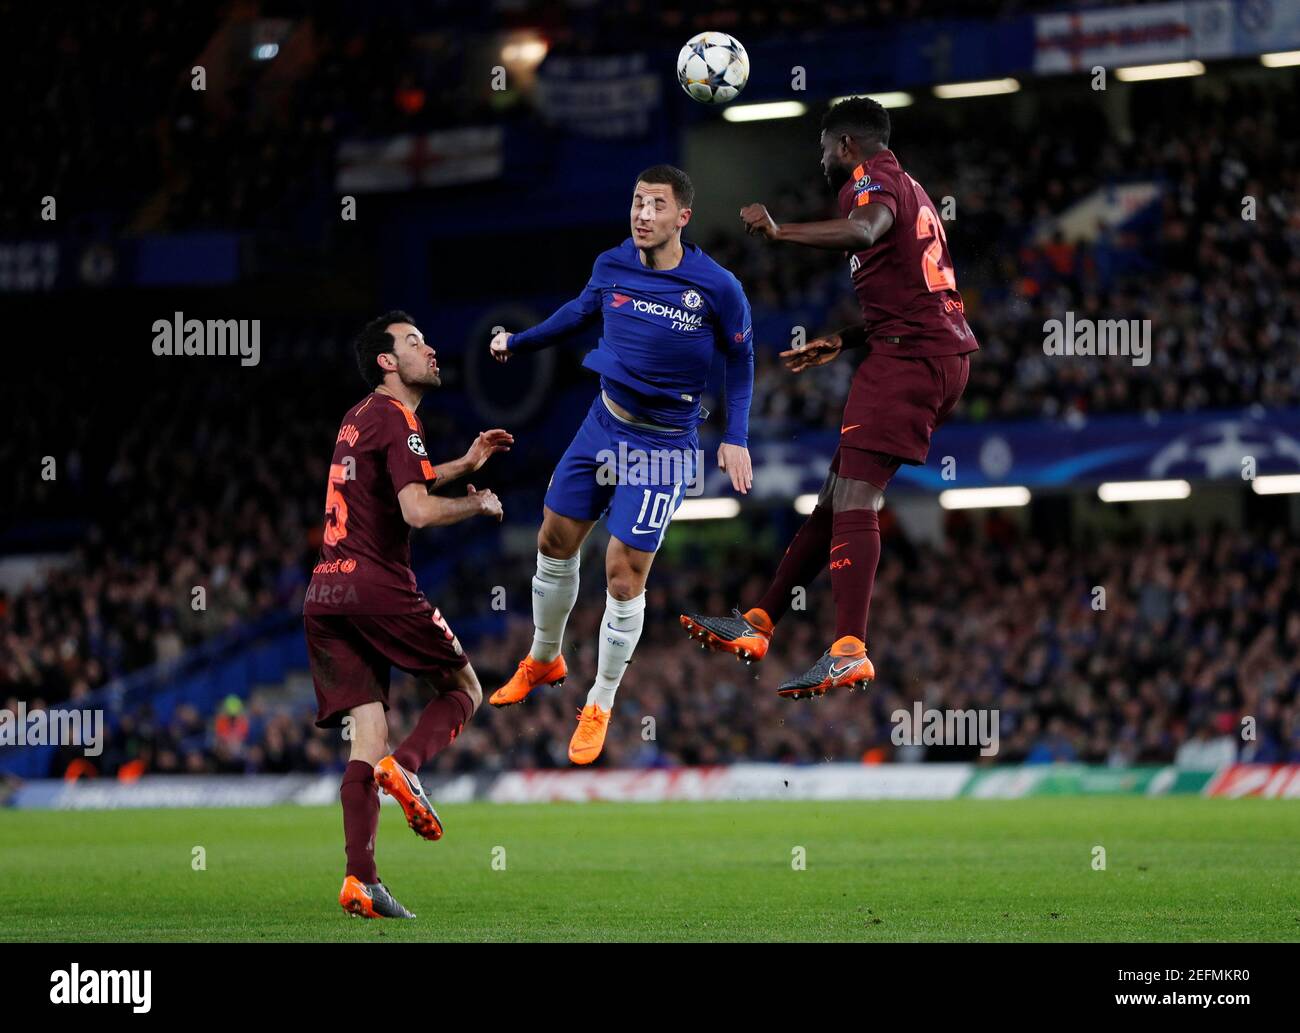 Soccer Football - Champions League Round of 16 First Leg - Chelsea vs FC Barcelona - Stamford Bridge, London, Britain - February 20, 2018   Chelsea's Eden Hazard in action with Barcelona’s Samuel Umtiti and Sergio Busquets    REUTERS/Eddie Keogh Stock Photo